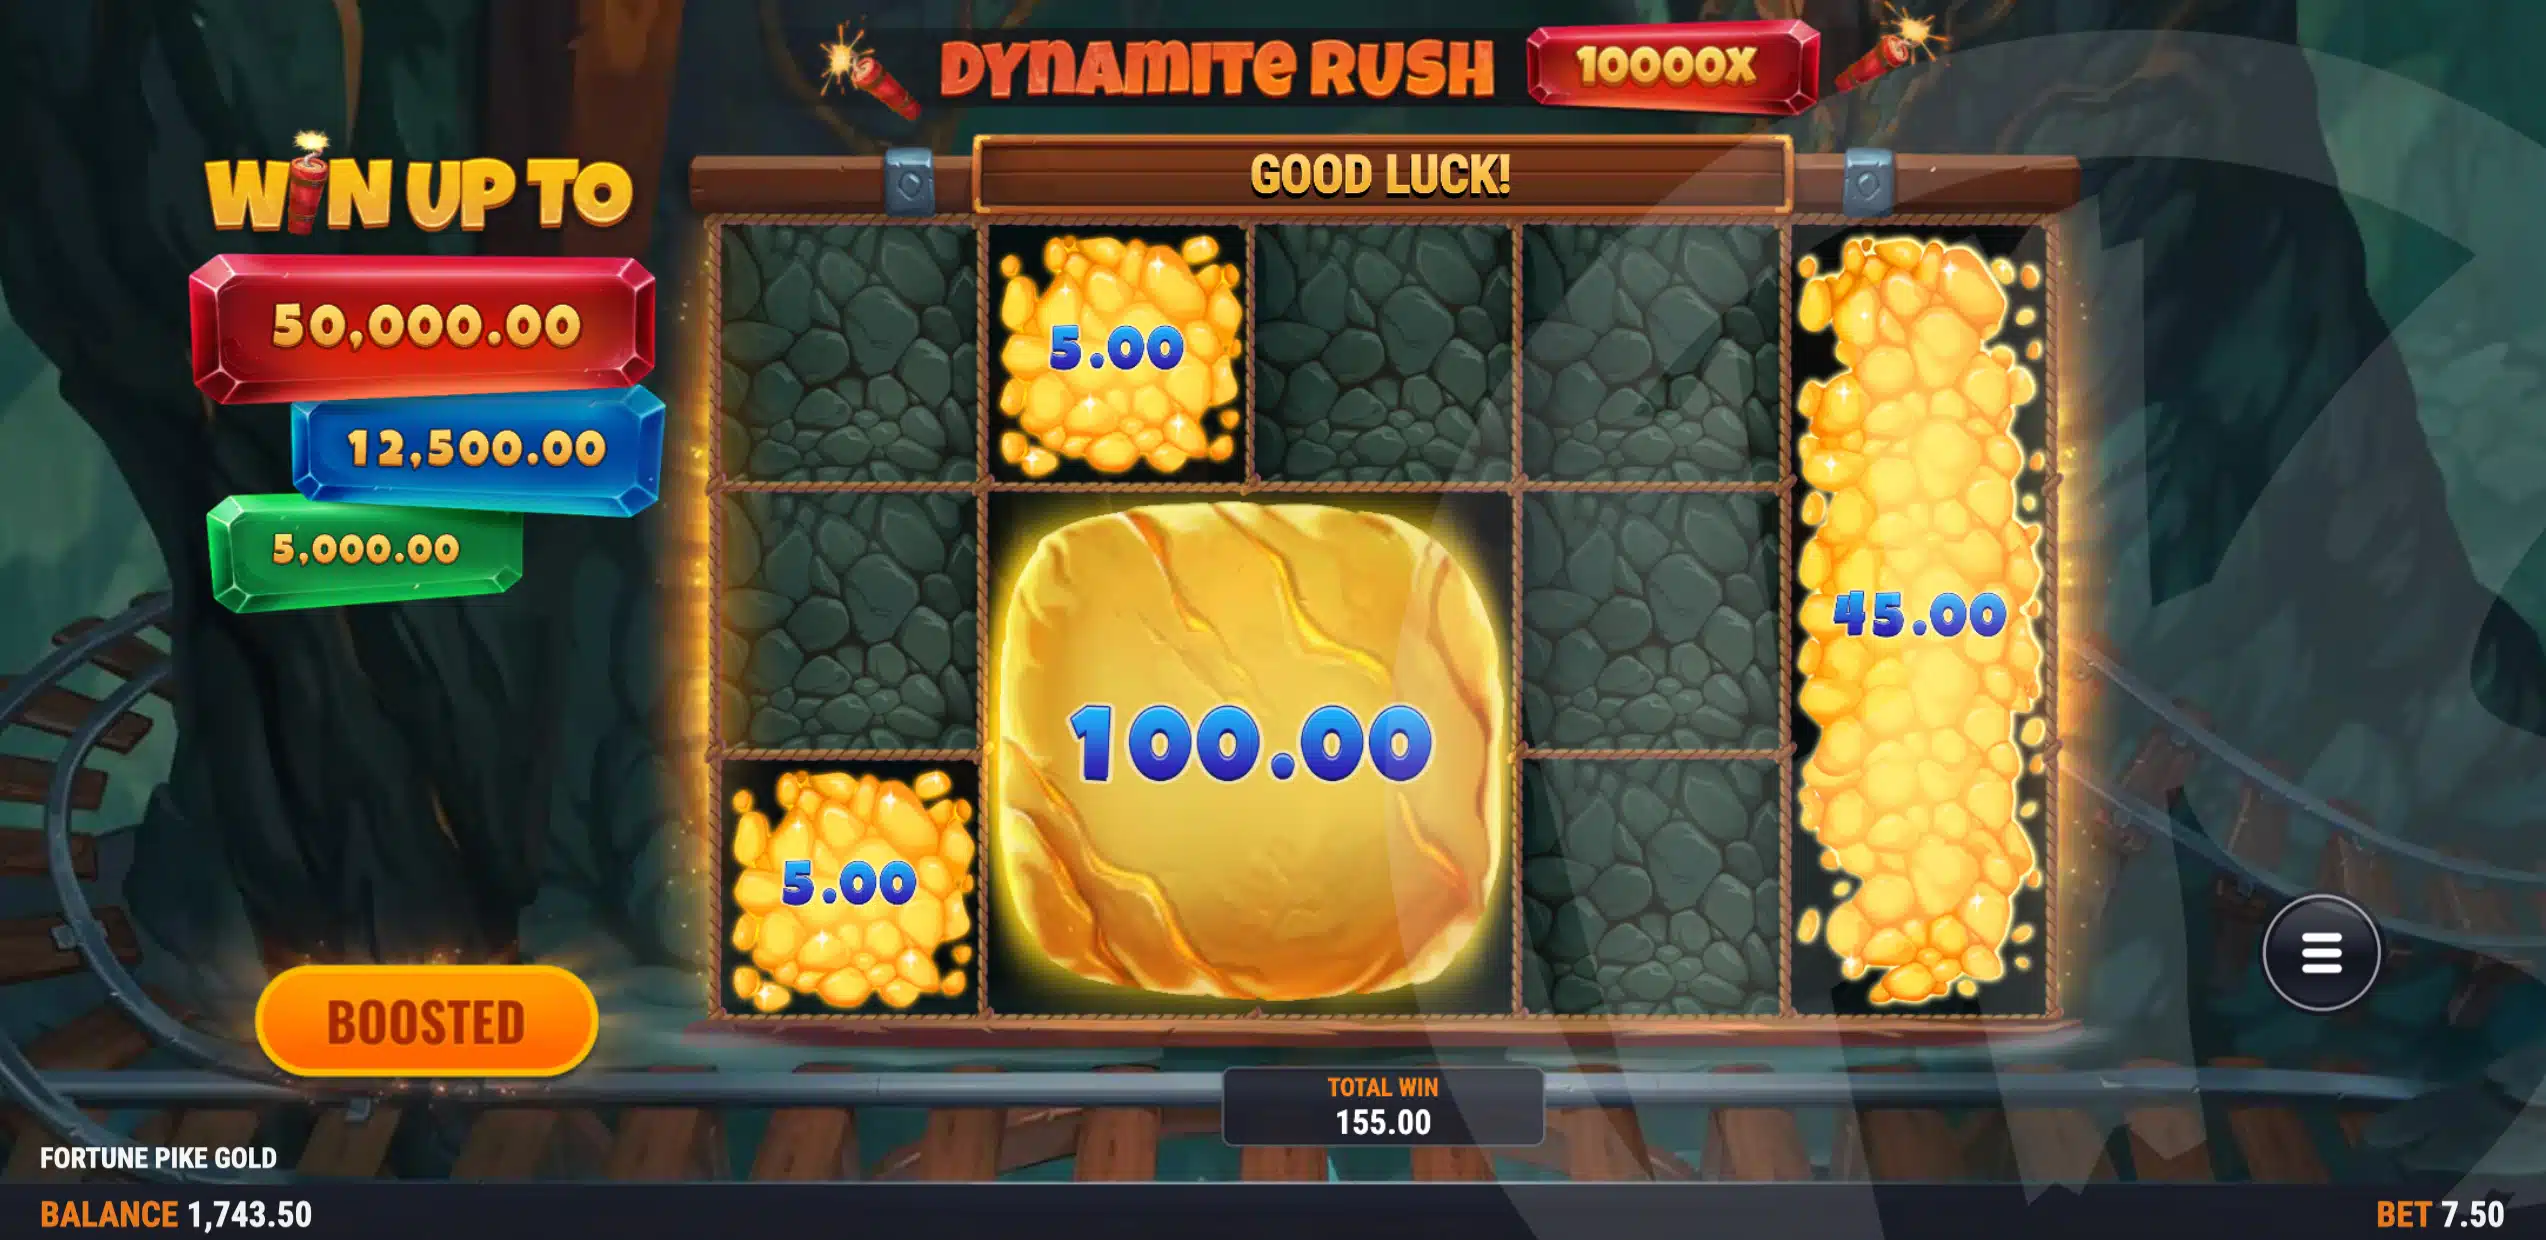 Fortune Pike Gold Dynamite Rush Game